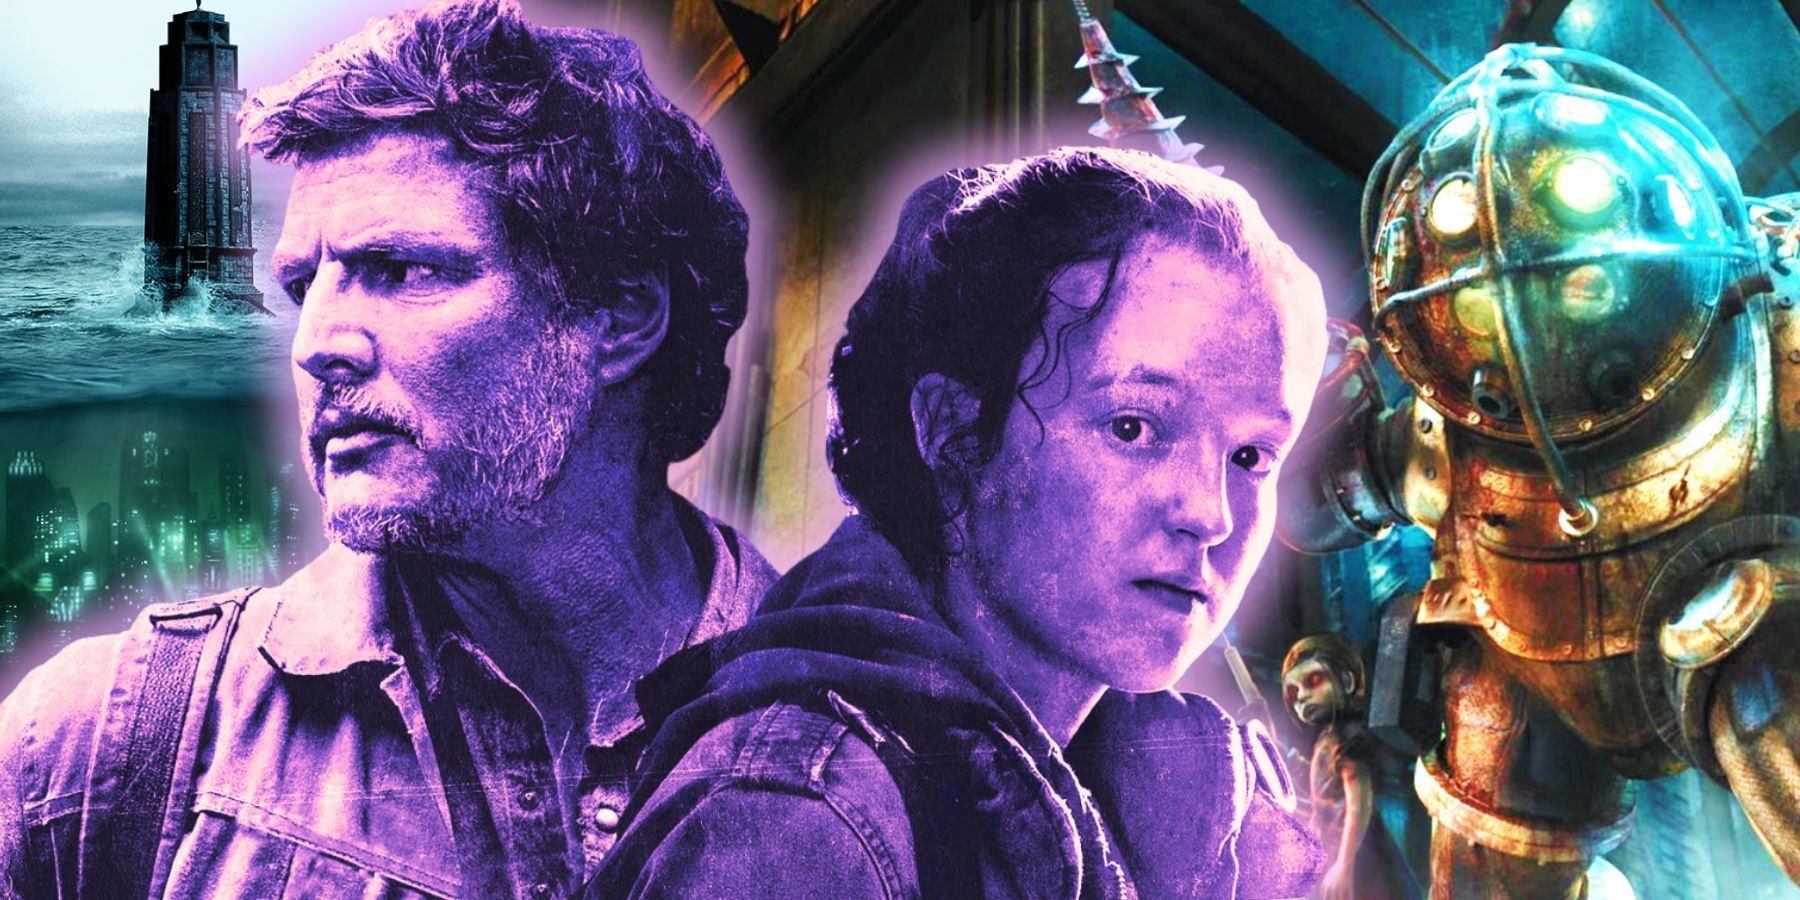 Joel and Ellie from HBO's The Last of Us season 1 collage with Big Daddy and Little Sister from Bioshock